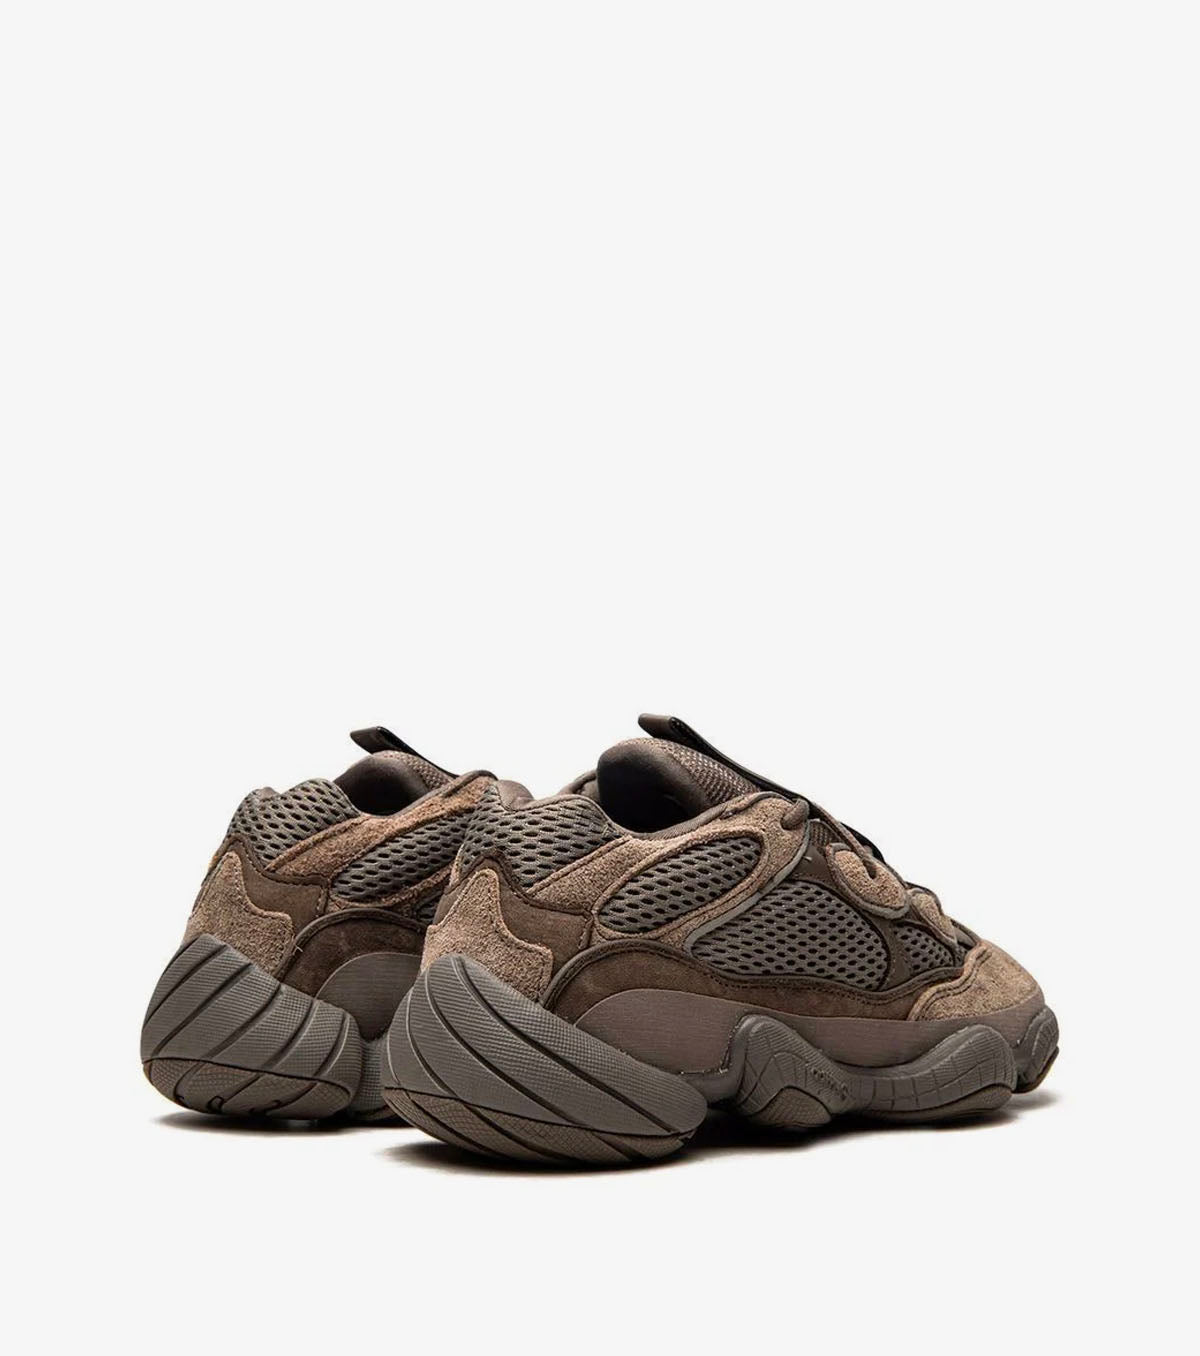 YEEZY 500 "Clay Brown" - SNKRBASE